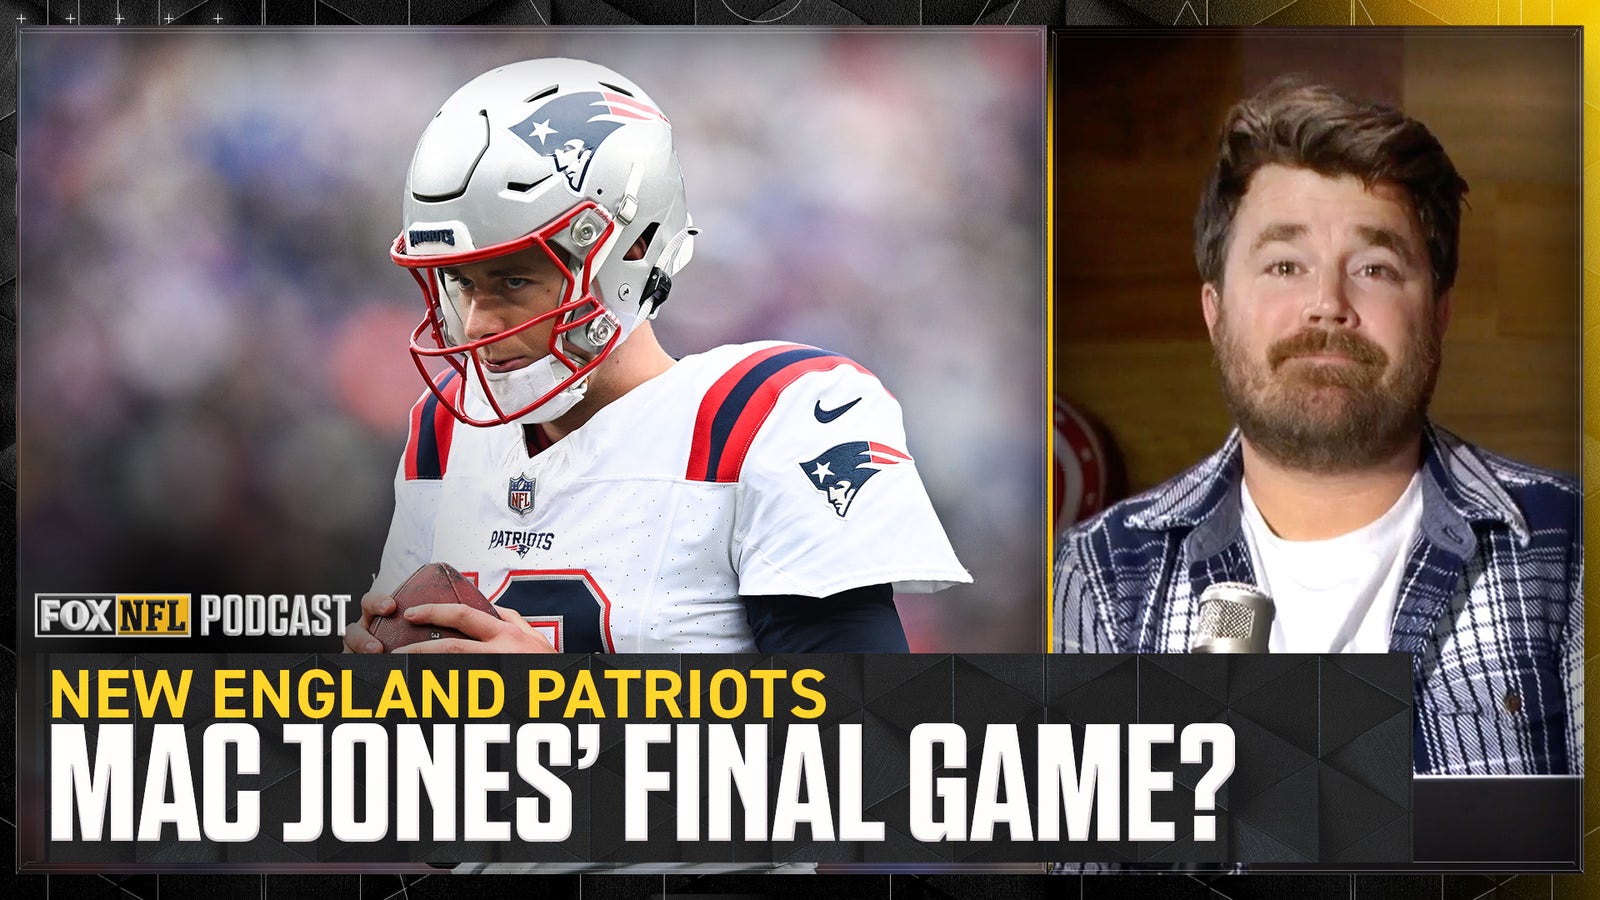 Did Mac Jones play his final game for the New England Patriots? 